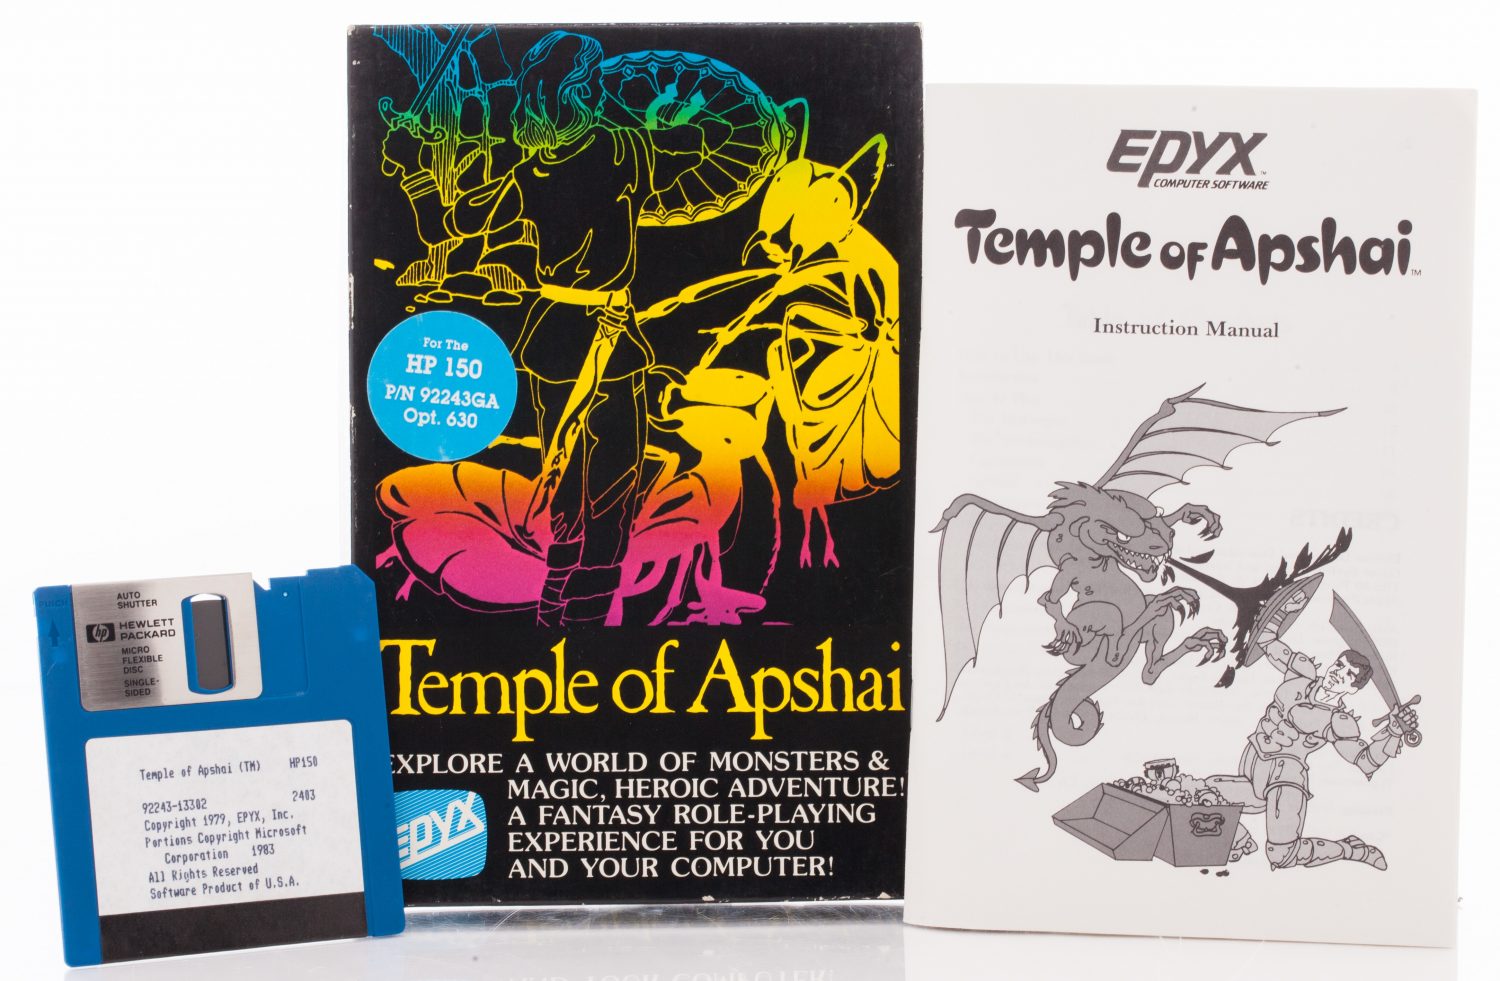 The 3.5-inch disk, box and instruction manual for Temple of Apshai video game.